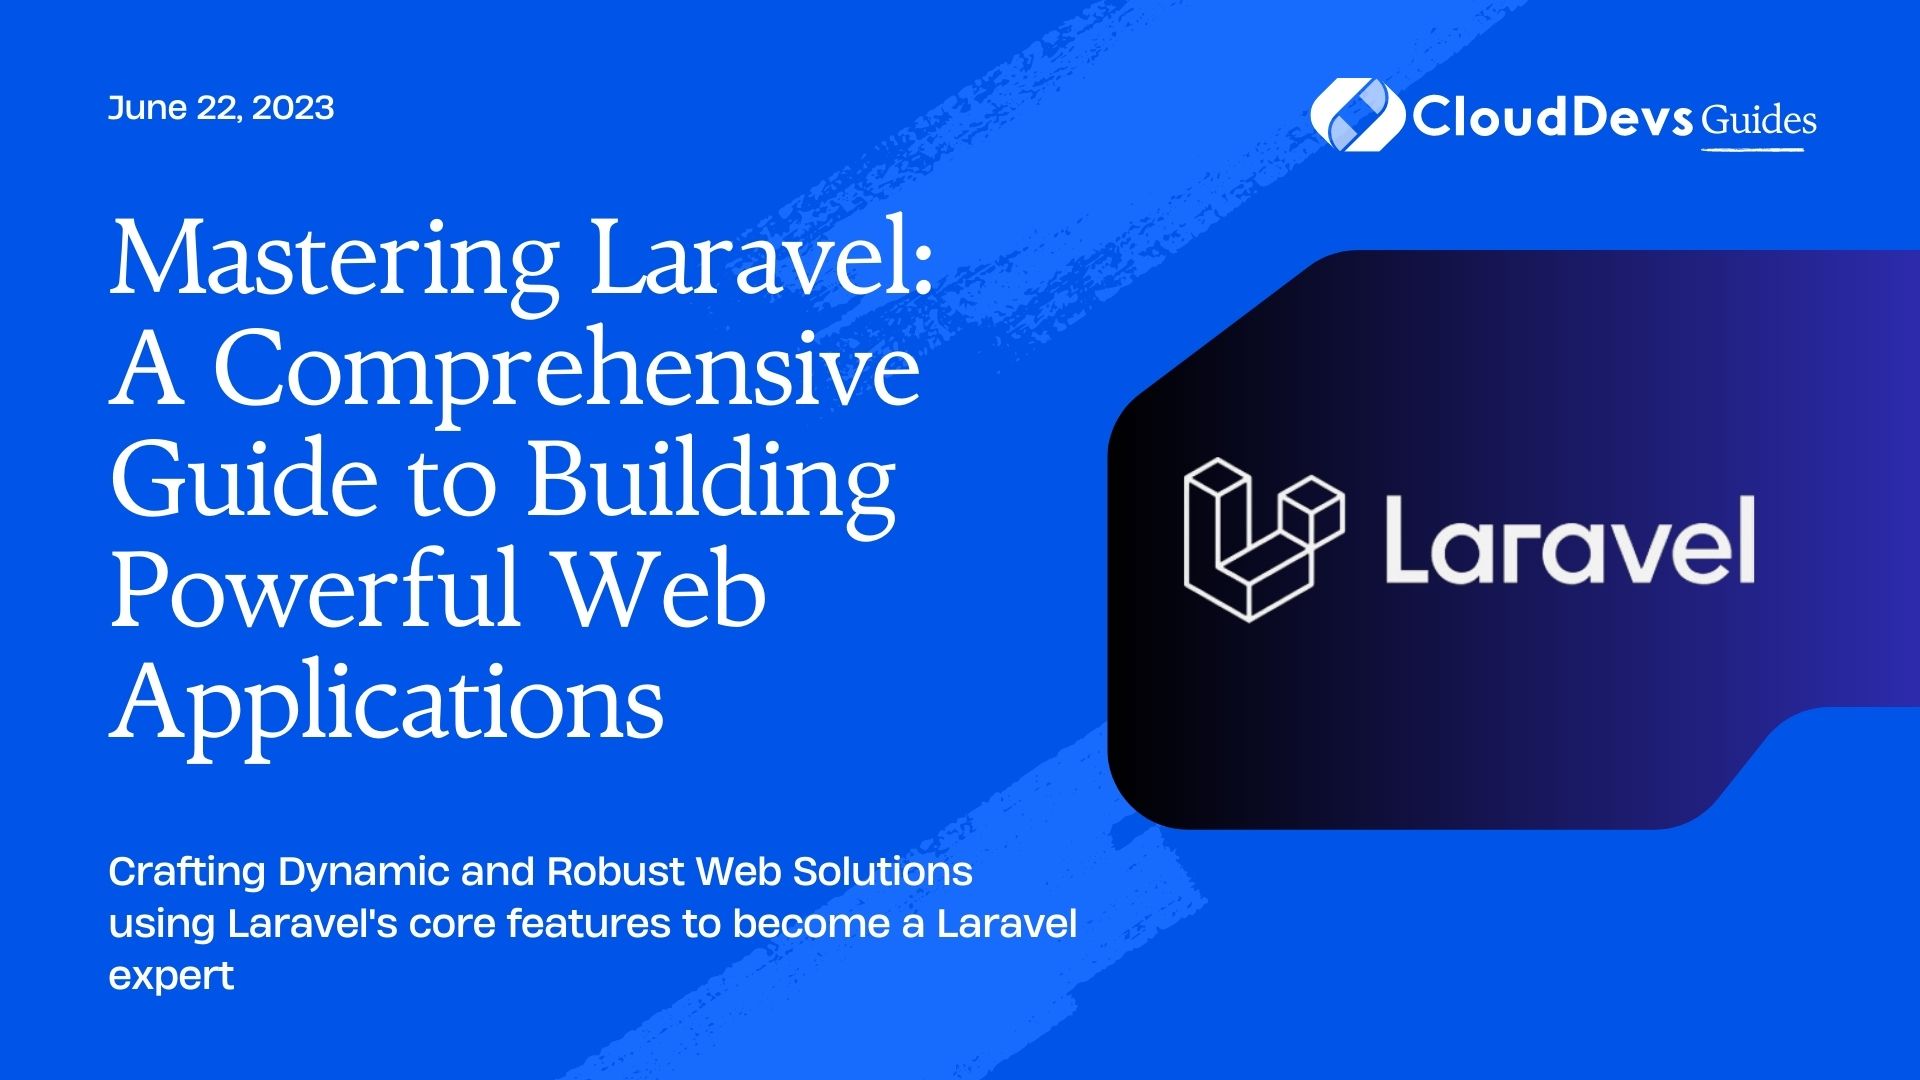 Mastering Laravel: A Comprehensive Guide to Building Powerful Web Applications